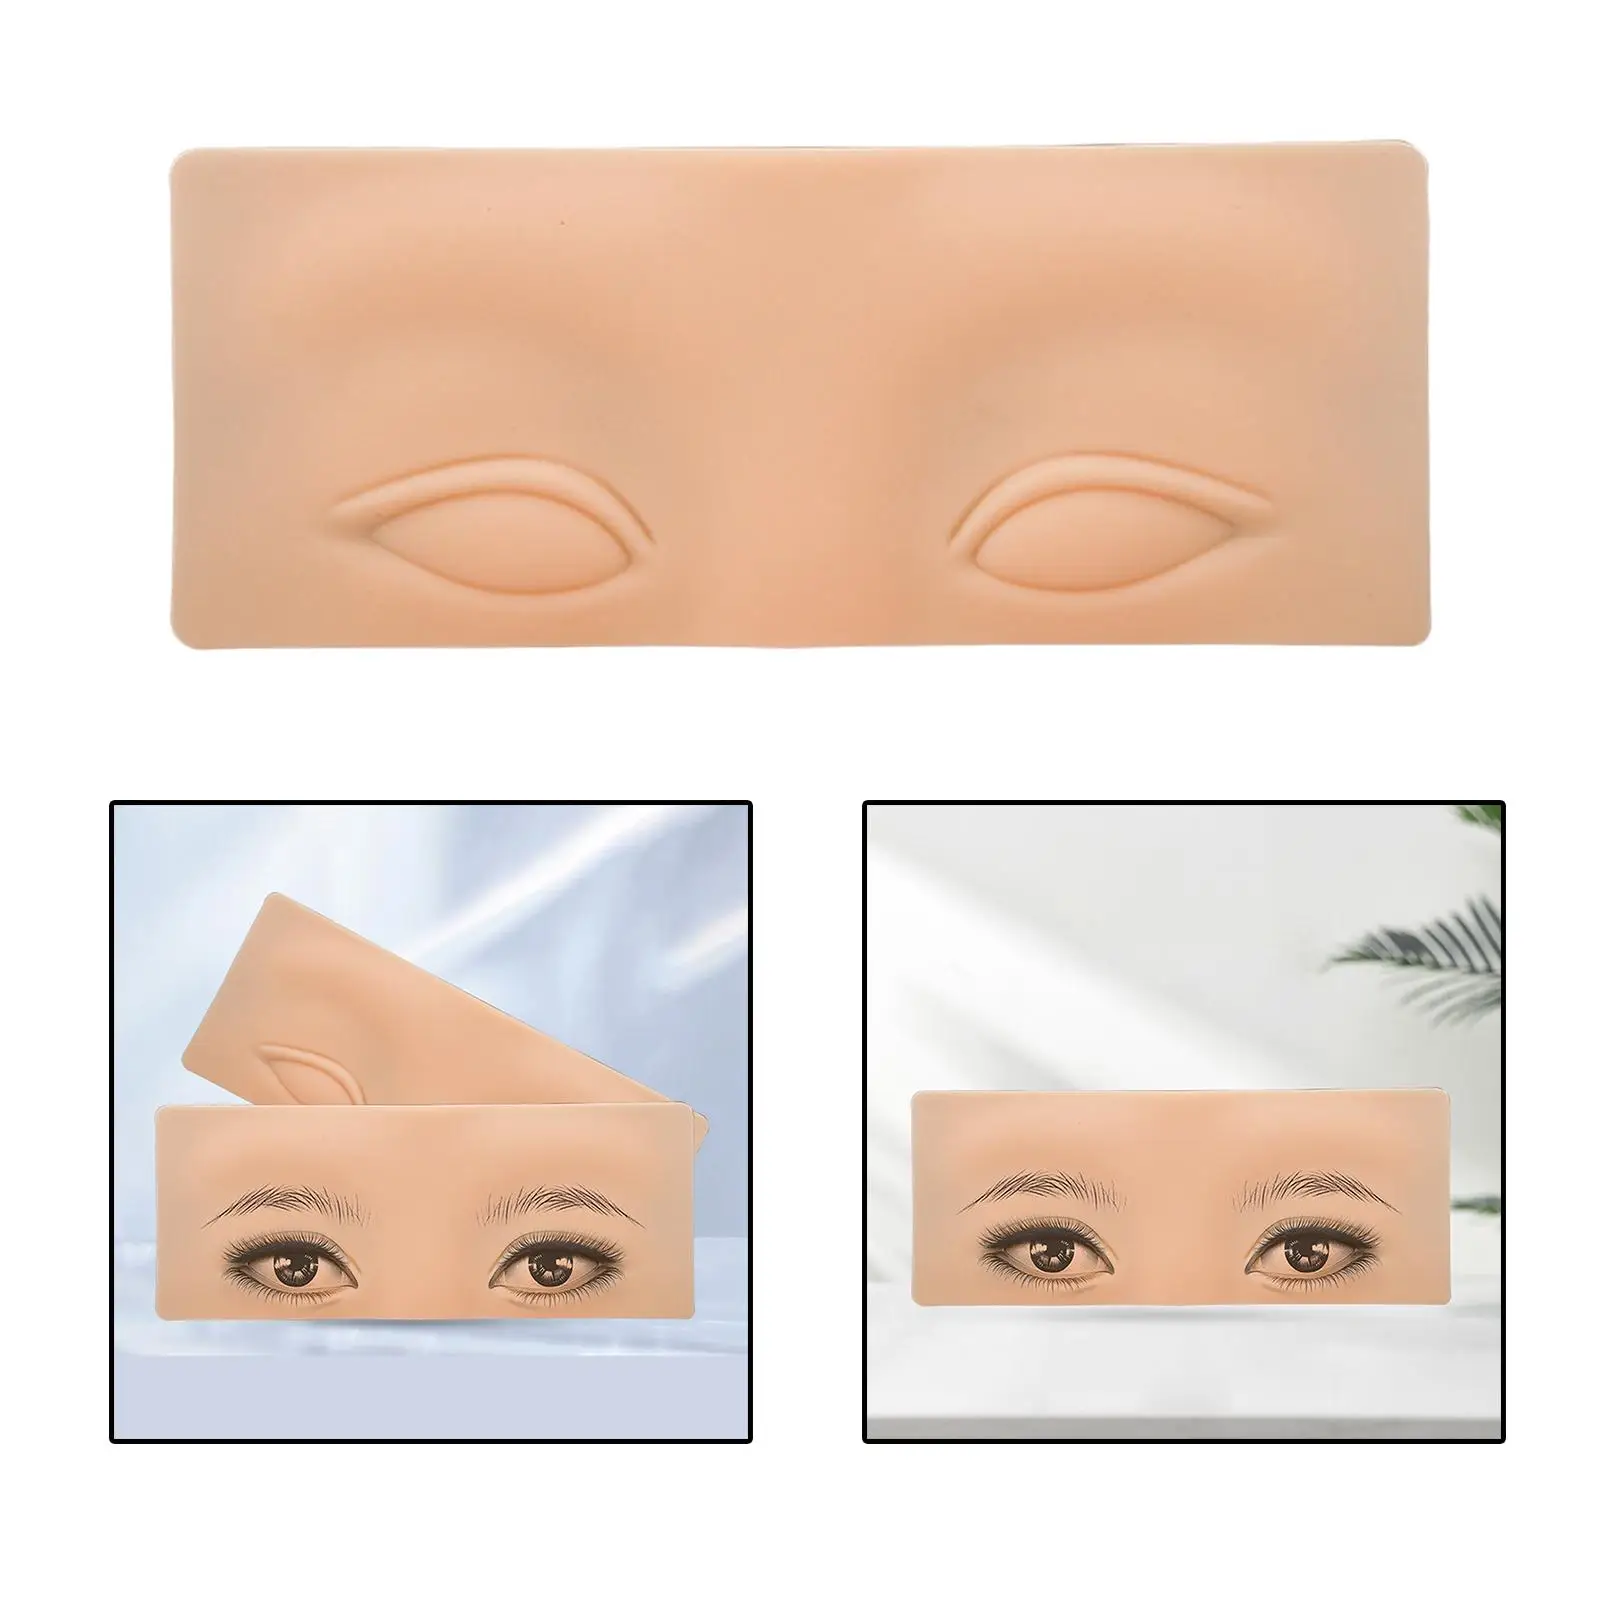 Professional 3D Silicone Eyebrow Eyeliner Practice Face Model Training Pad Practice Aid Experienced Artists Beautician Novice